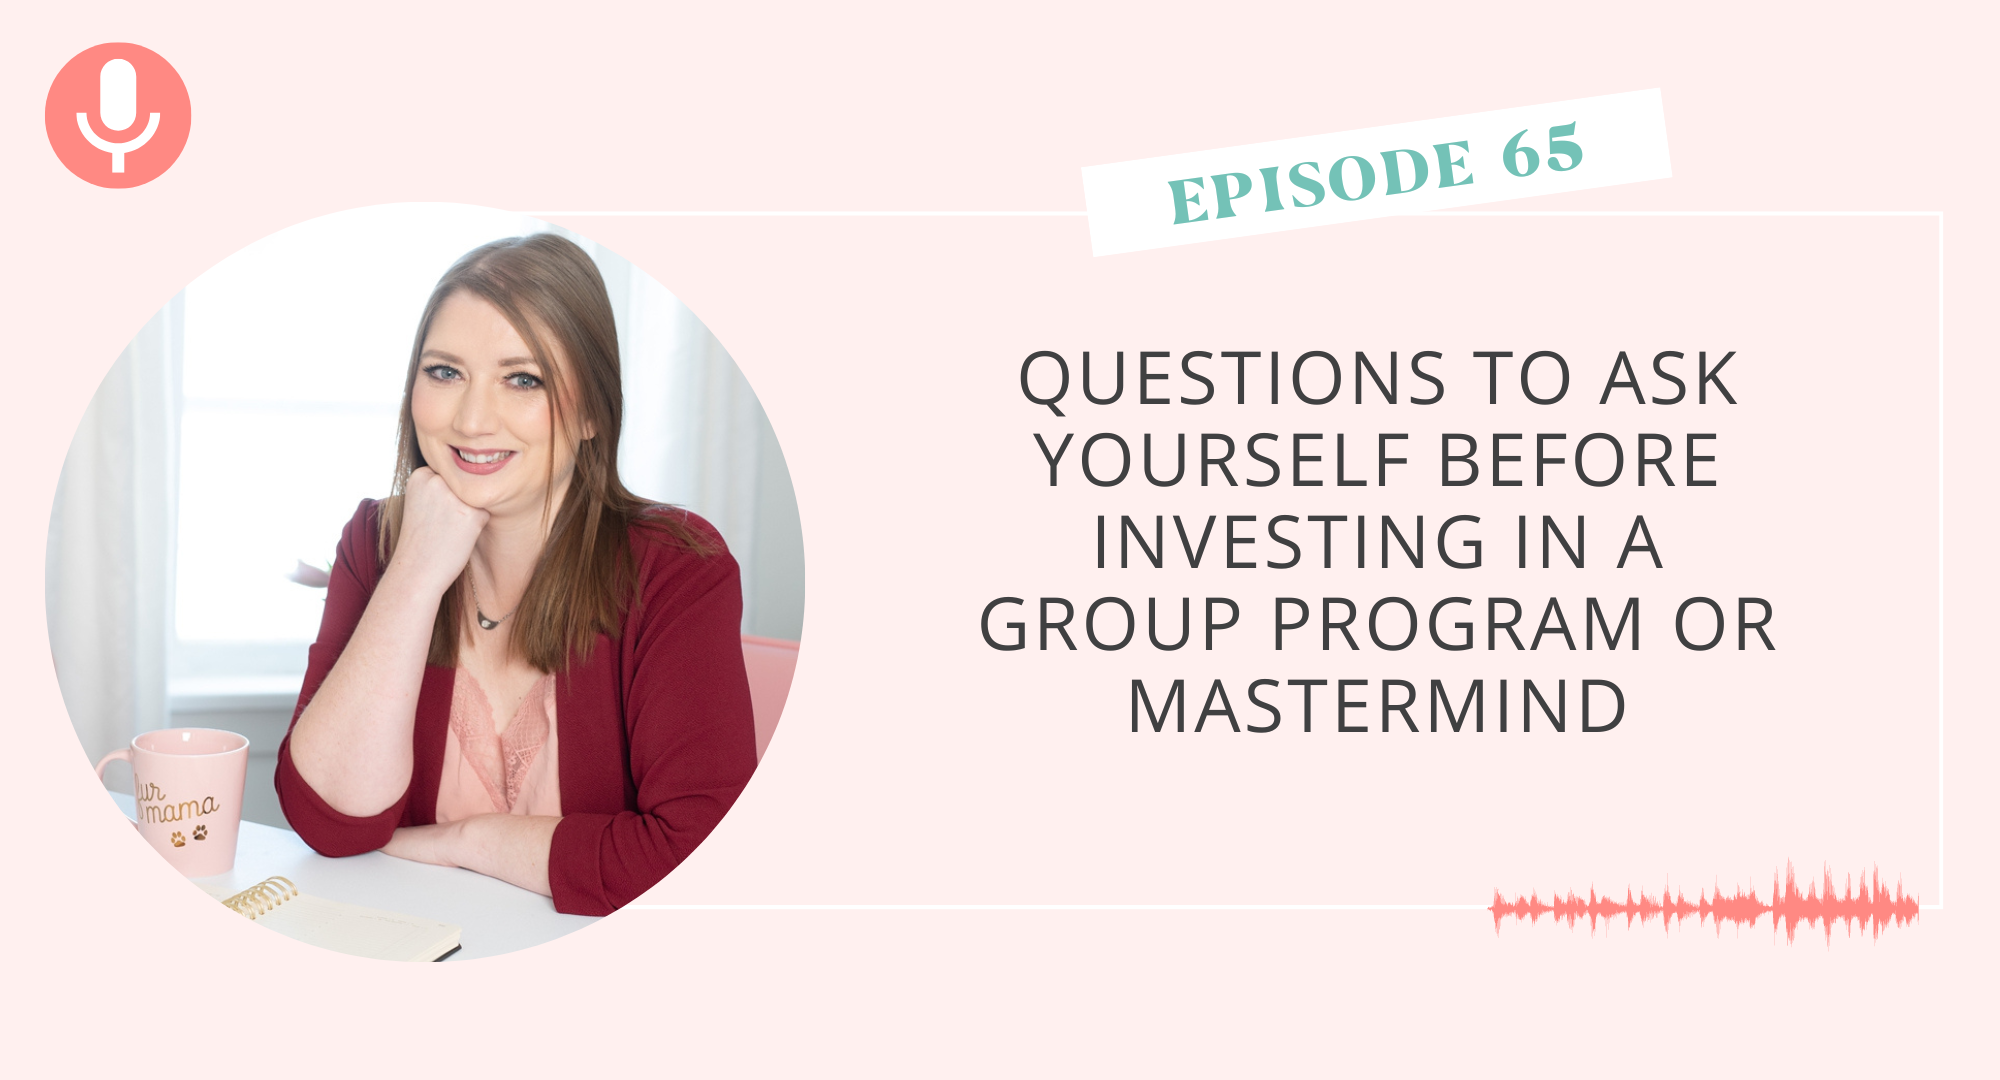 Questions to Ask Yourself Before Investing in a Group Program or Mastermind